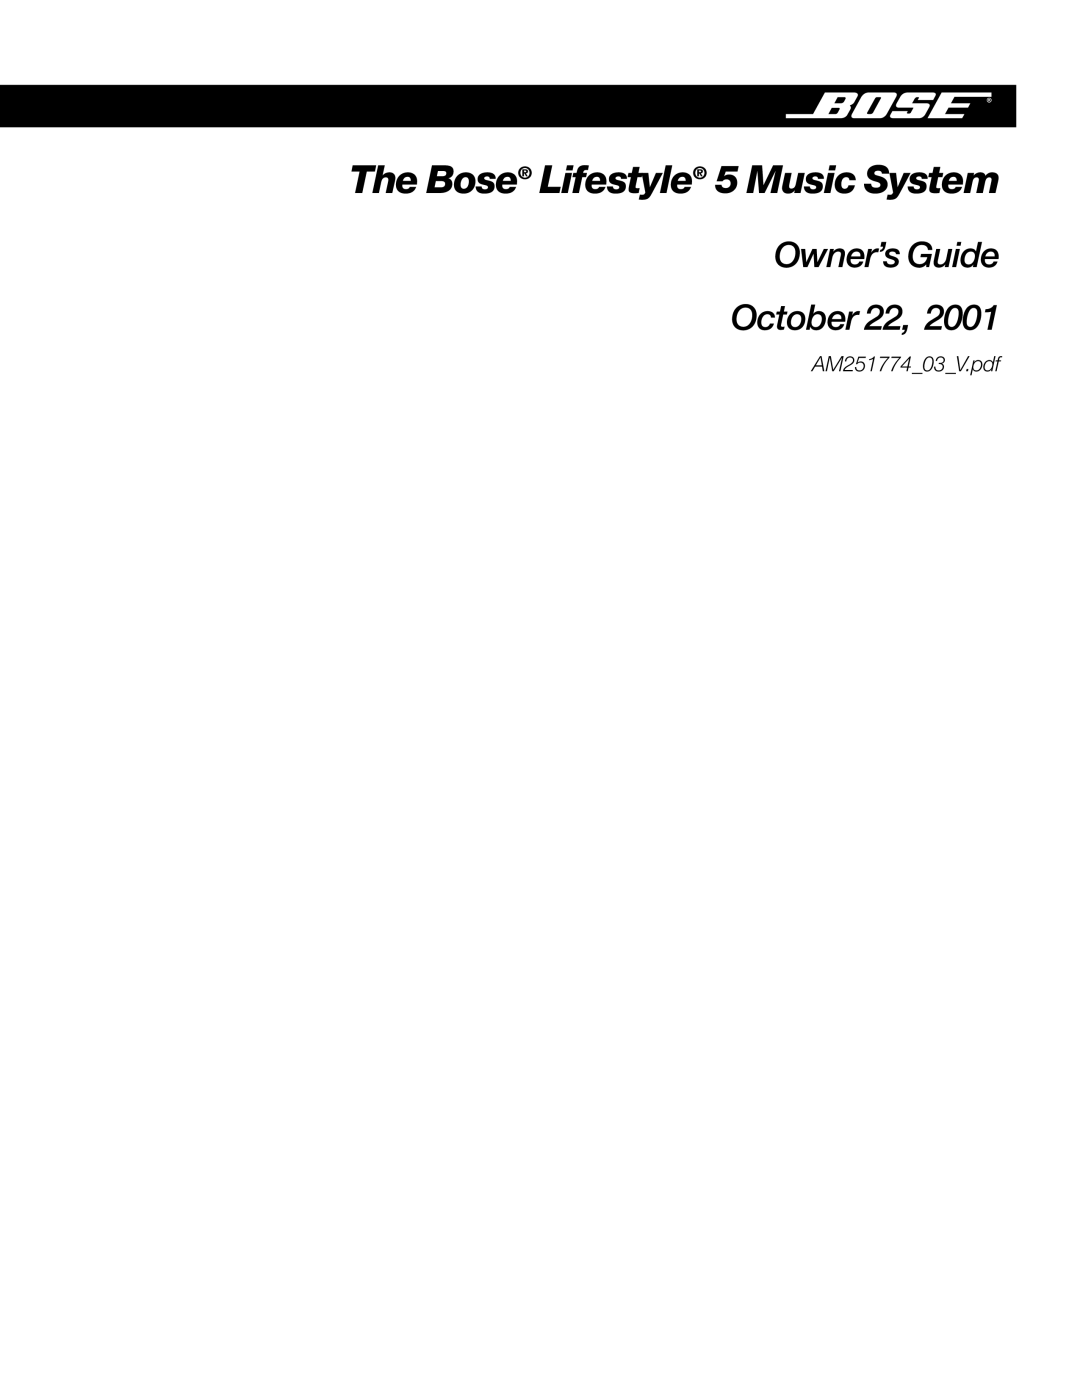 Bose manual The Bose Lifestyle 5 Music System, Owner’s Guide October 